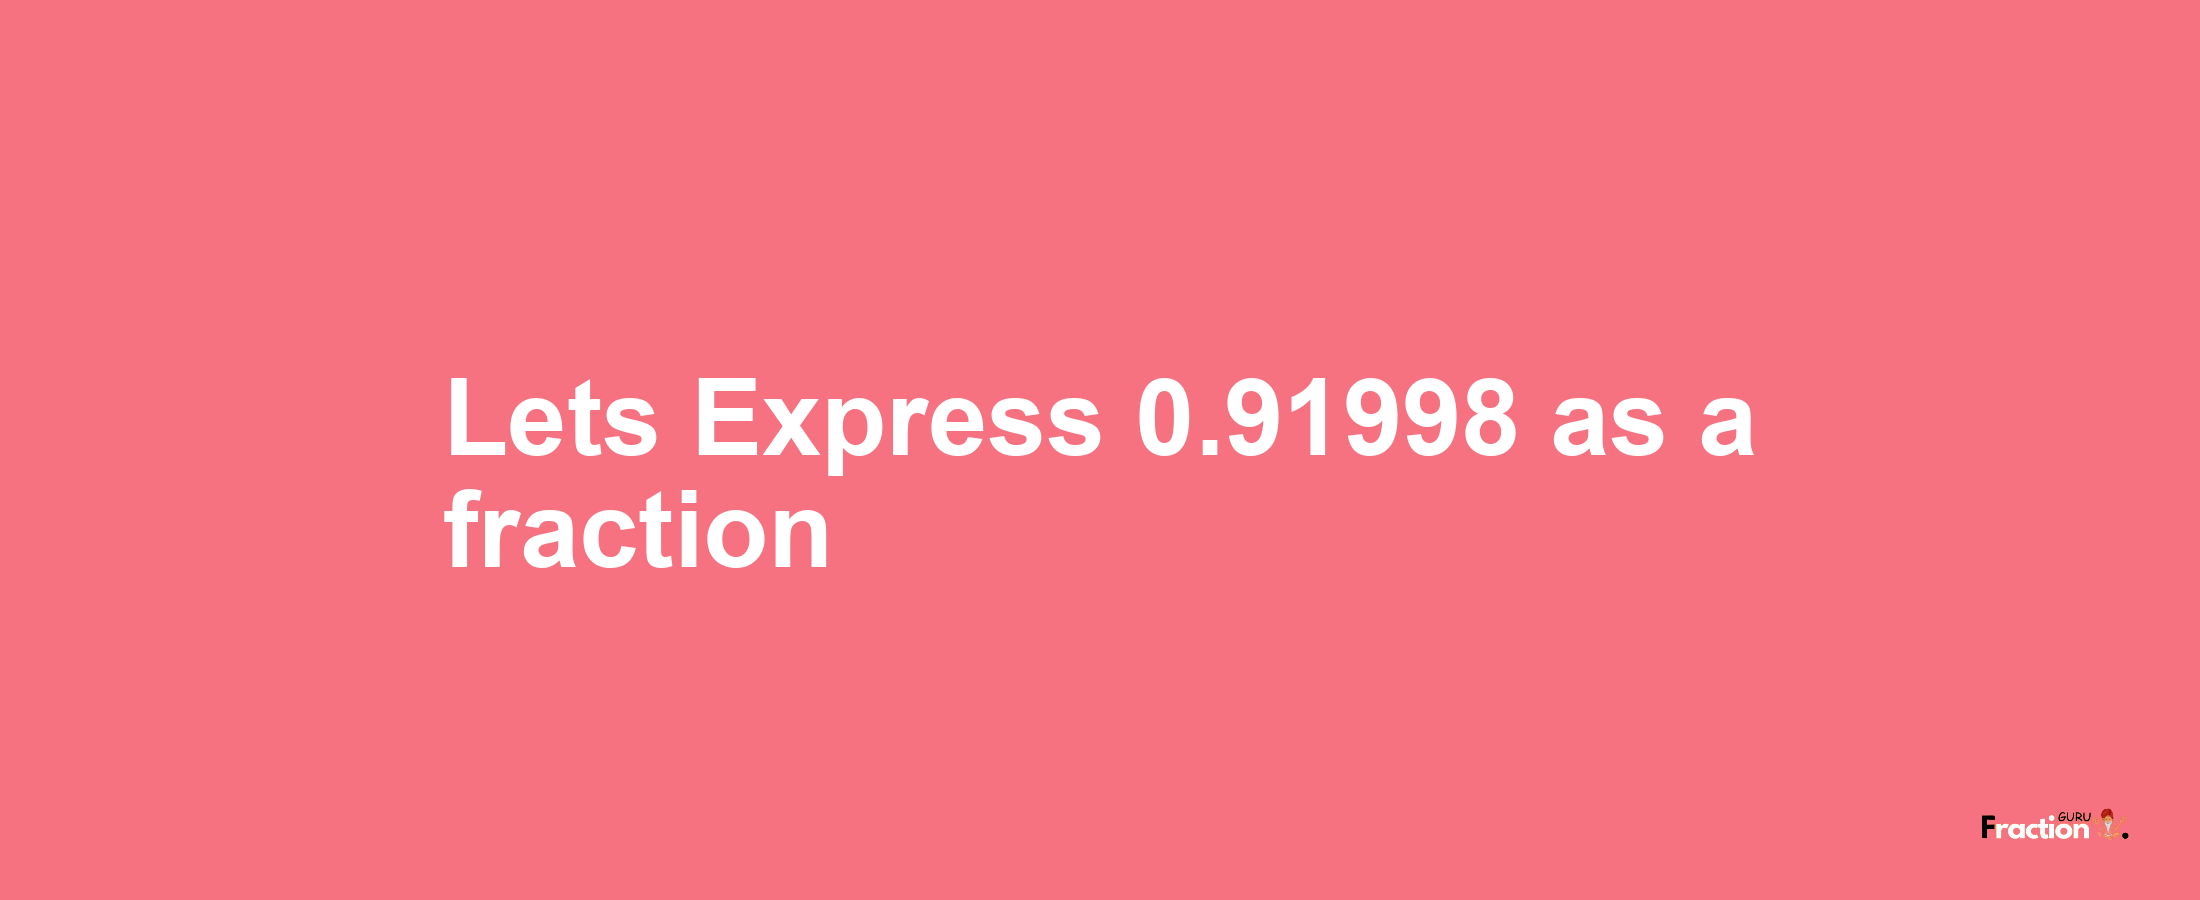 Lets Express 0.91998 as afraction